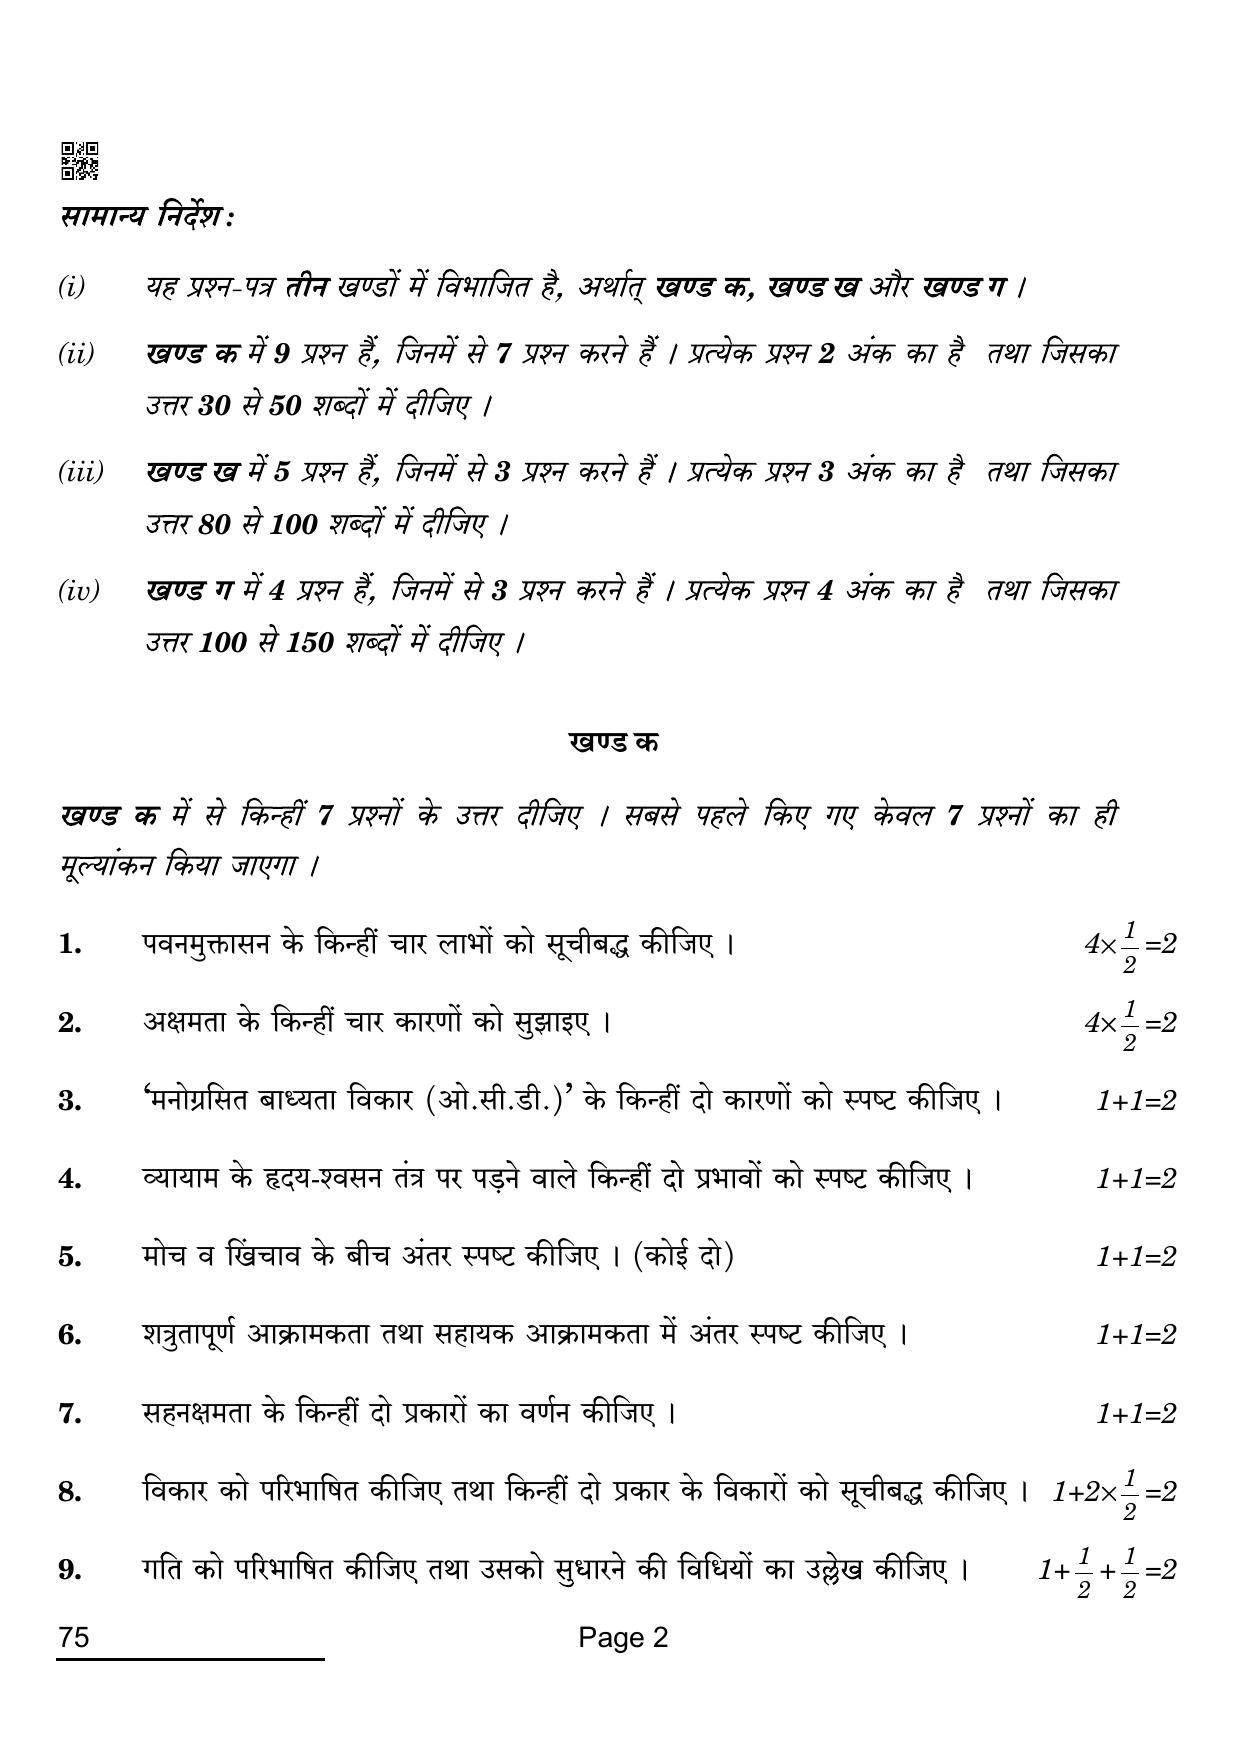 CBSE Class 12 75 PHYSICAL EDUCATION 2022 Compartment Question Paper - Page 2